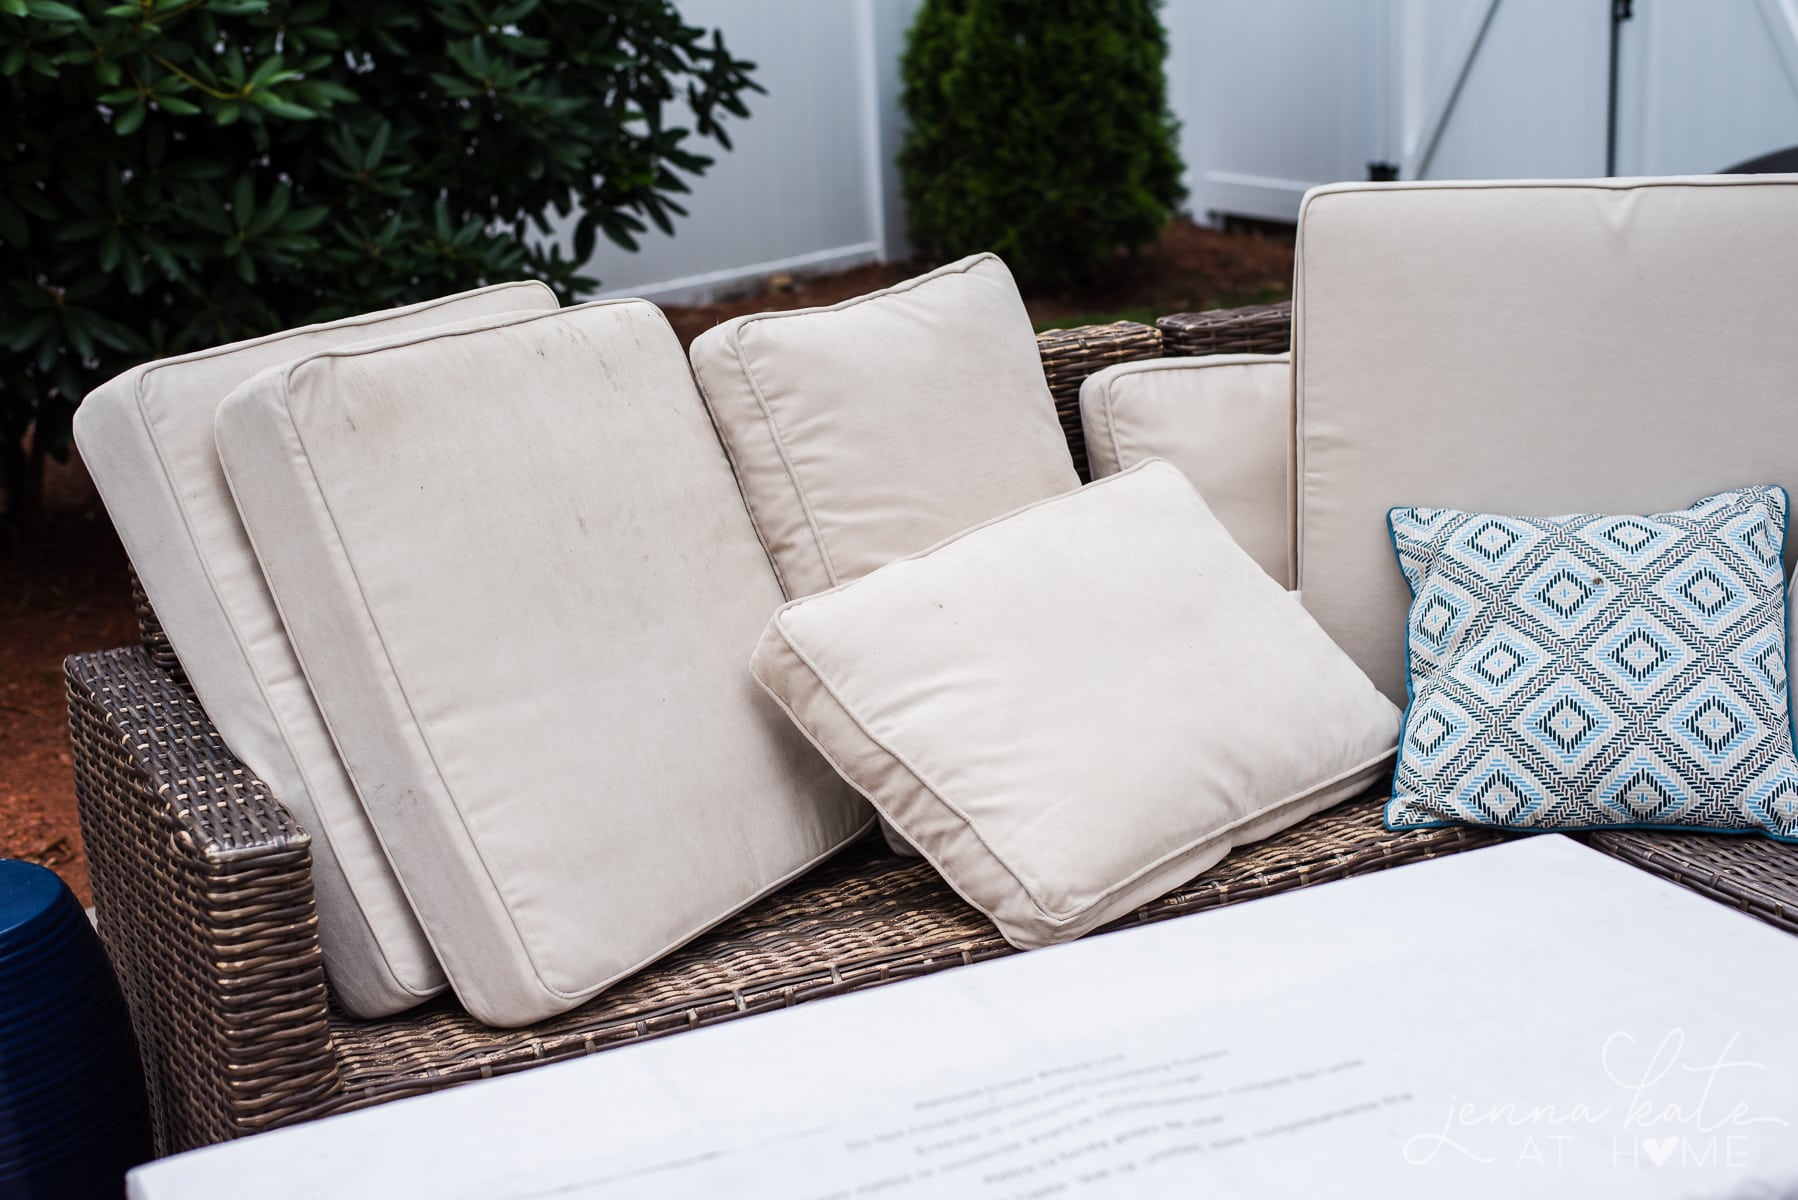 How To Clean Outdoor Cushions Jenna, Can I Wash Outdoor Cushion Covers